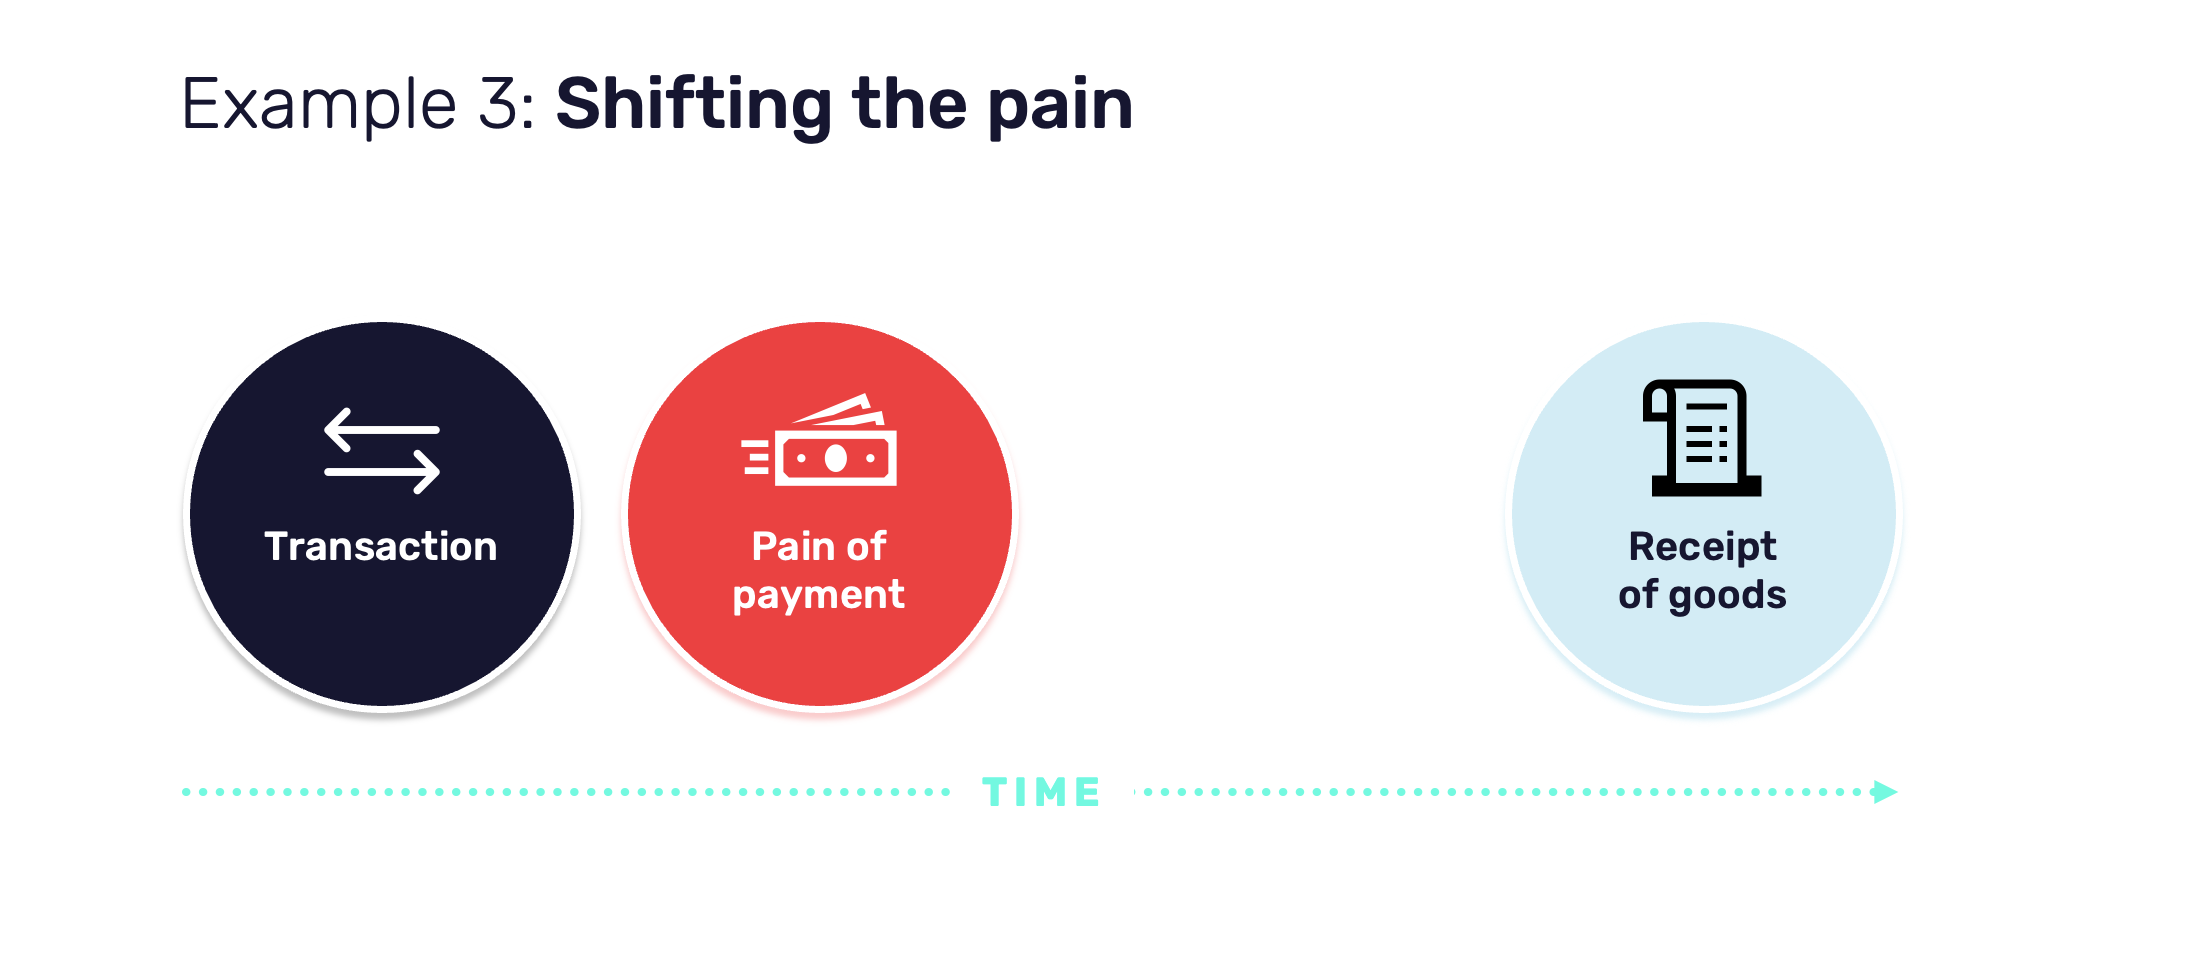 Controlling pain of payment